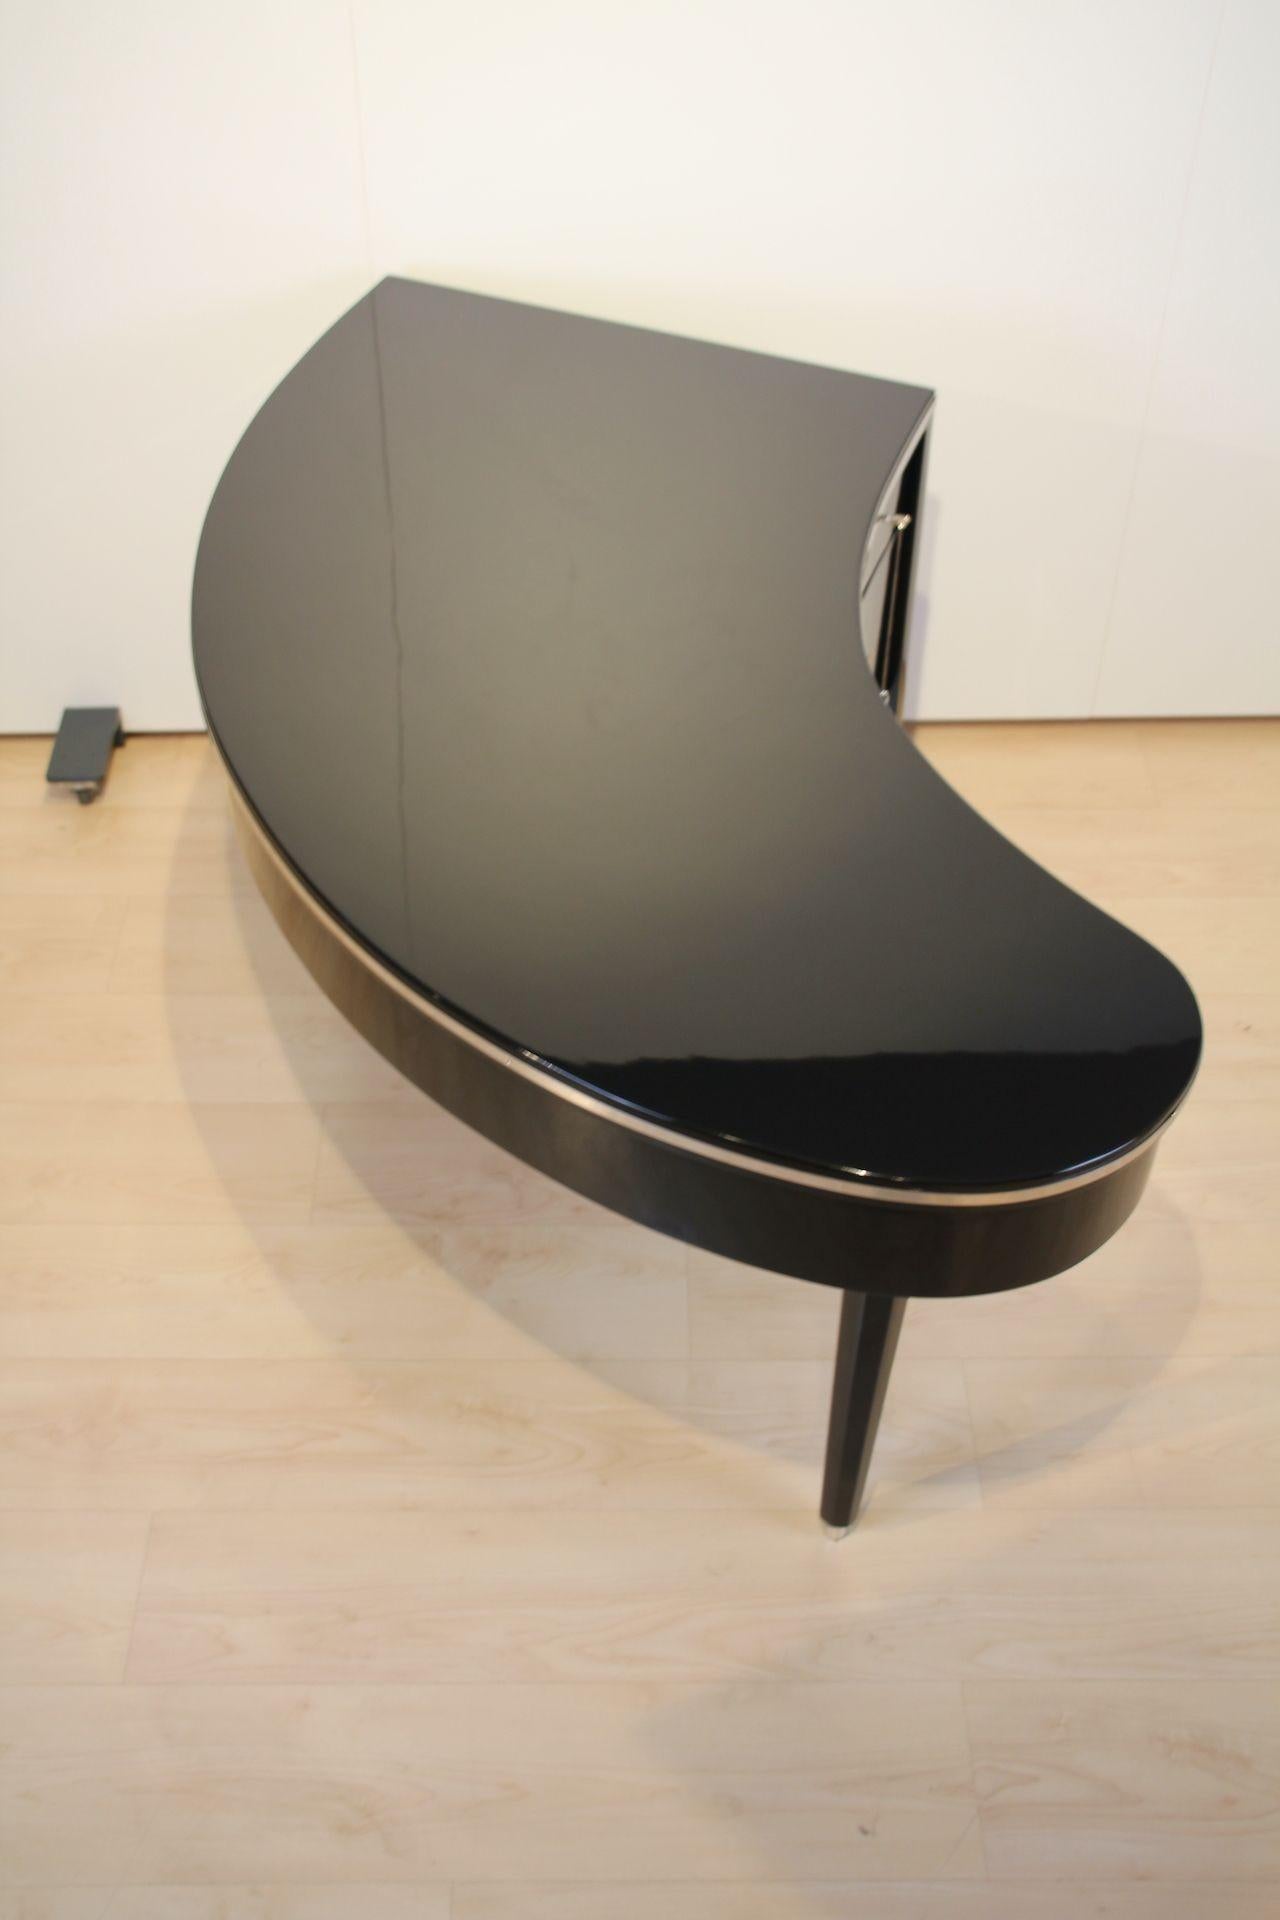 Design Desk, Curved Top, Piano Lacquer, Chrome, France, 1950s For Sale 11